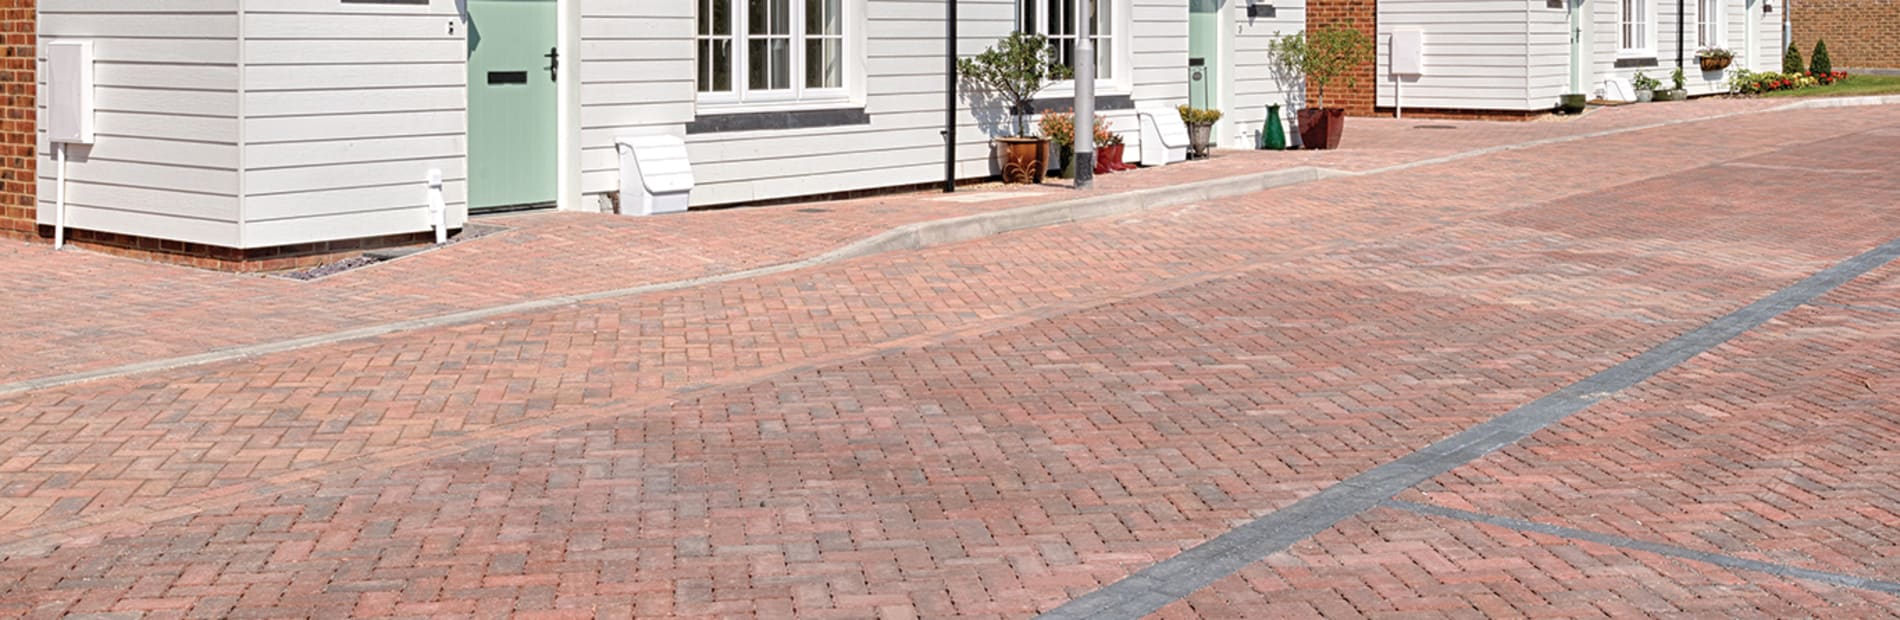 Red block paving in front of white house.